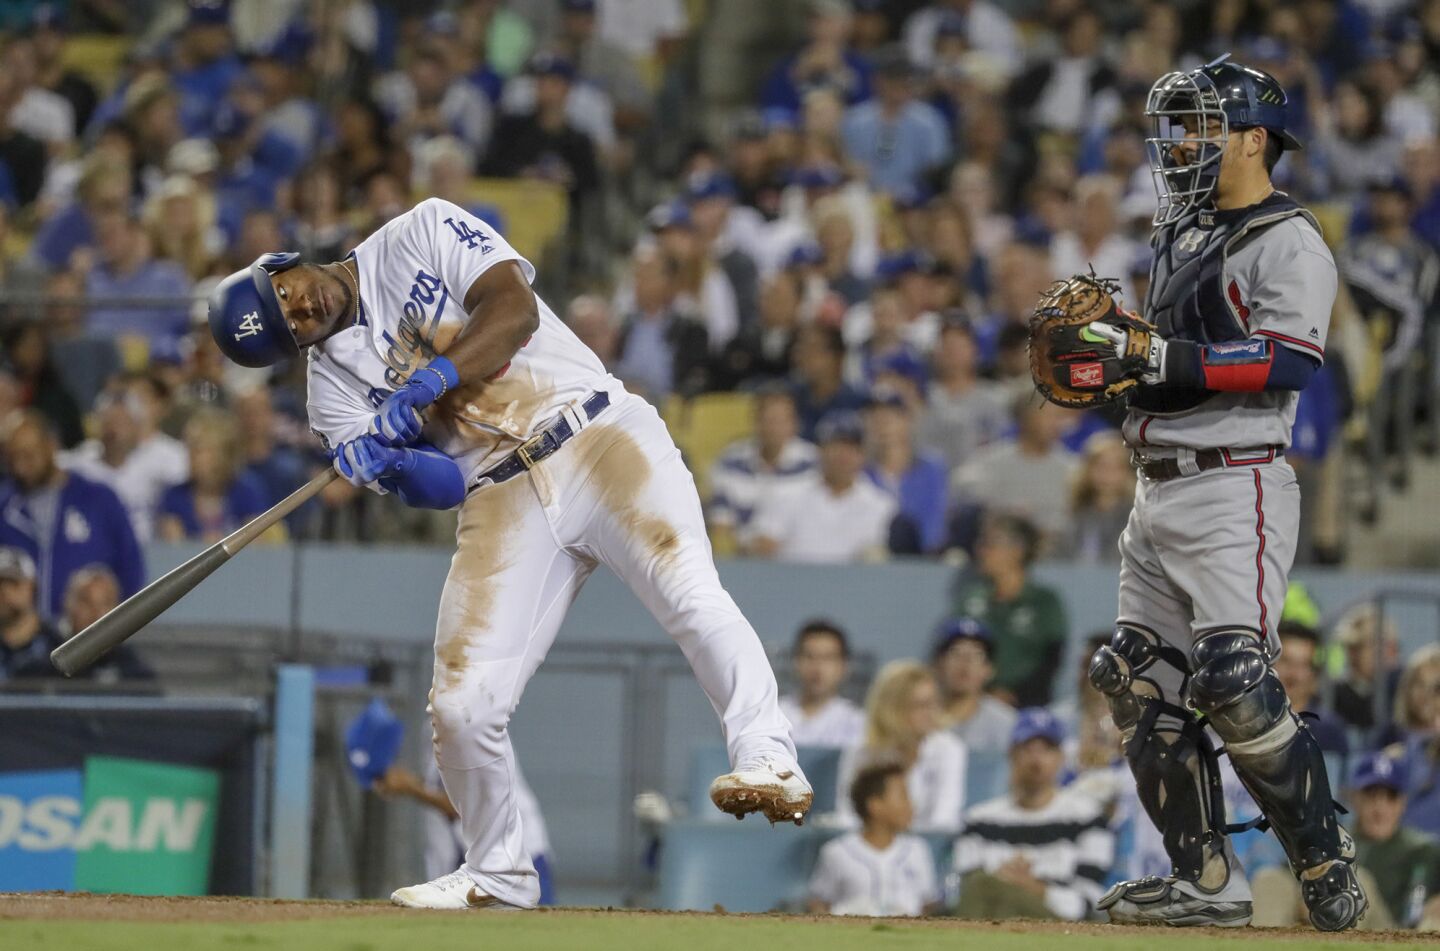 Dodgers right fielder Yasiel Puig contorts his body after fouling off a pitch against Braves reliever Touki Toussaint in the sixth inning.